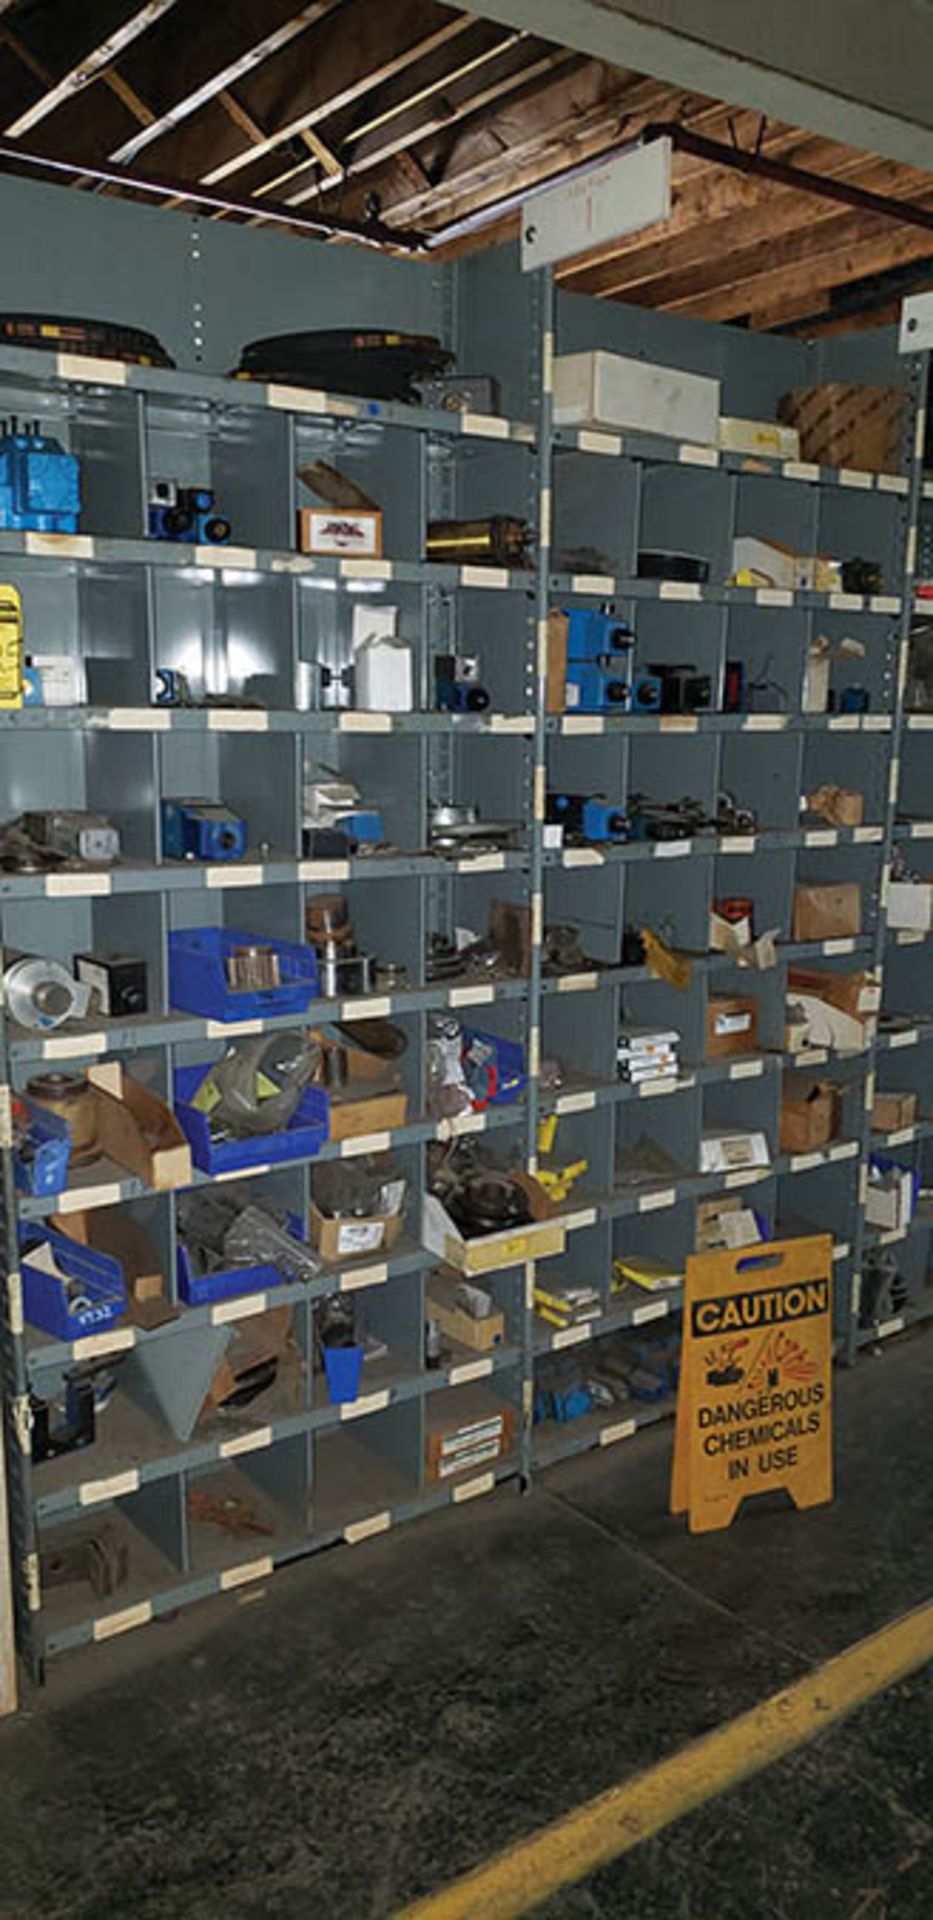 SHELF UNITS W/ CONTENTS: ROLLER CHAIN, SPROCKETS, PUMP UNITS, HOSE, PVC FITTINGS, AND MUCH MORE - Image 2 of 23